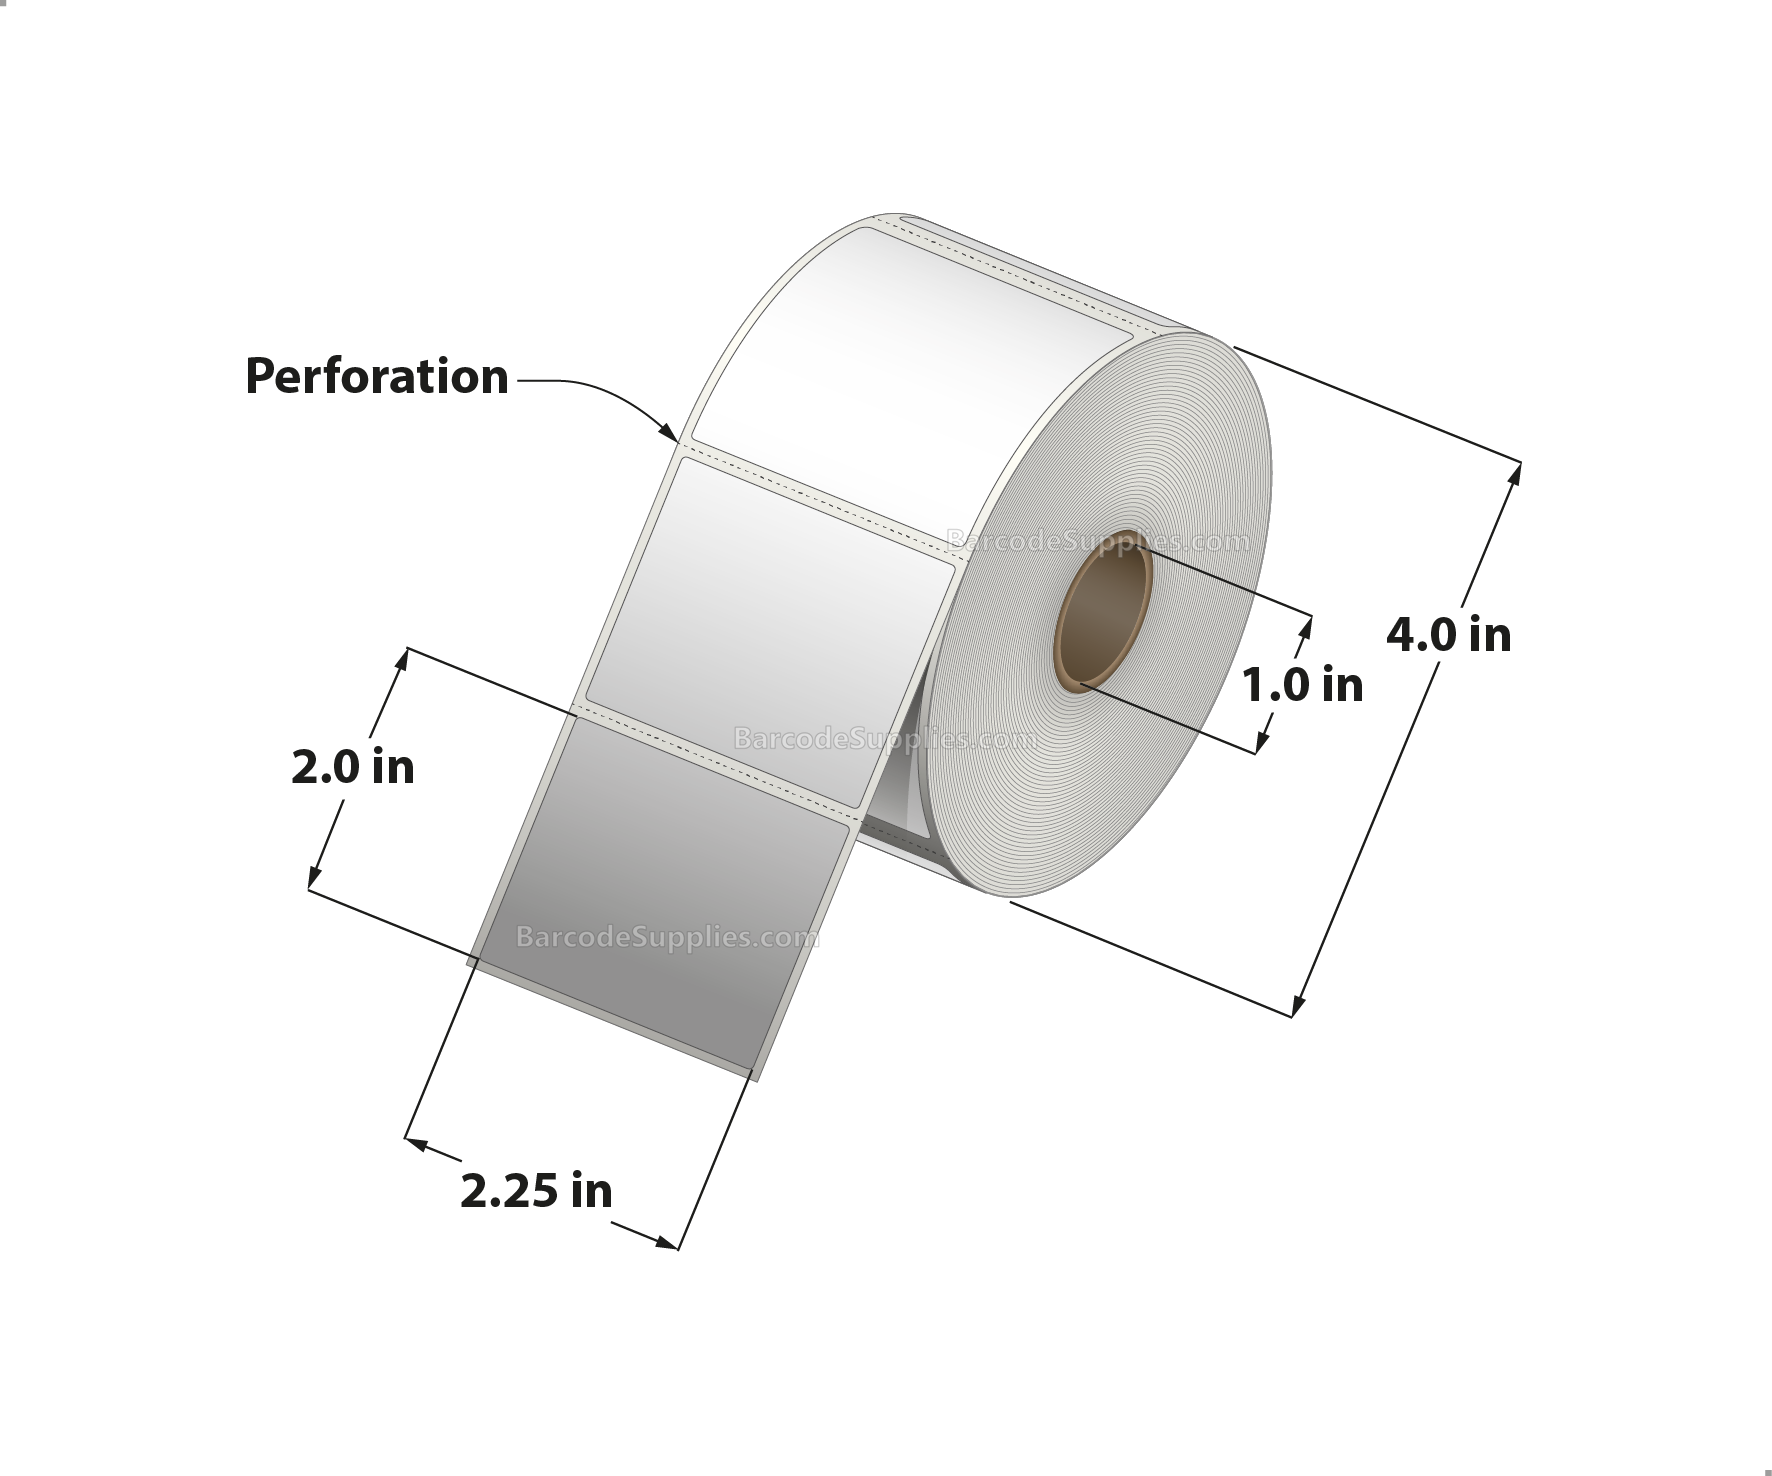 2.25 x 2 Direct Thermal White Labels With Rubber Adhesive - Perforated - 735 Labels Per Roll - Carton Of 12 Rolls - 8820 Labels Total - MPN: RDT4-225200-1P